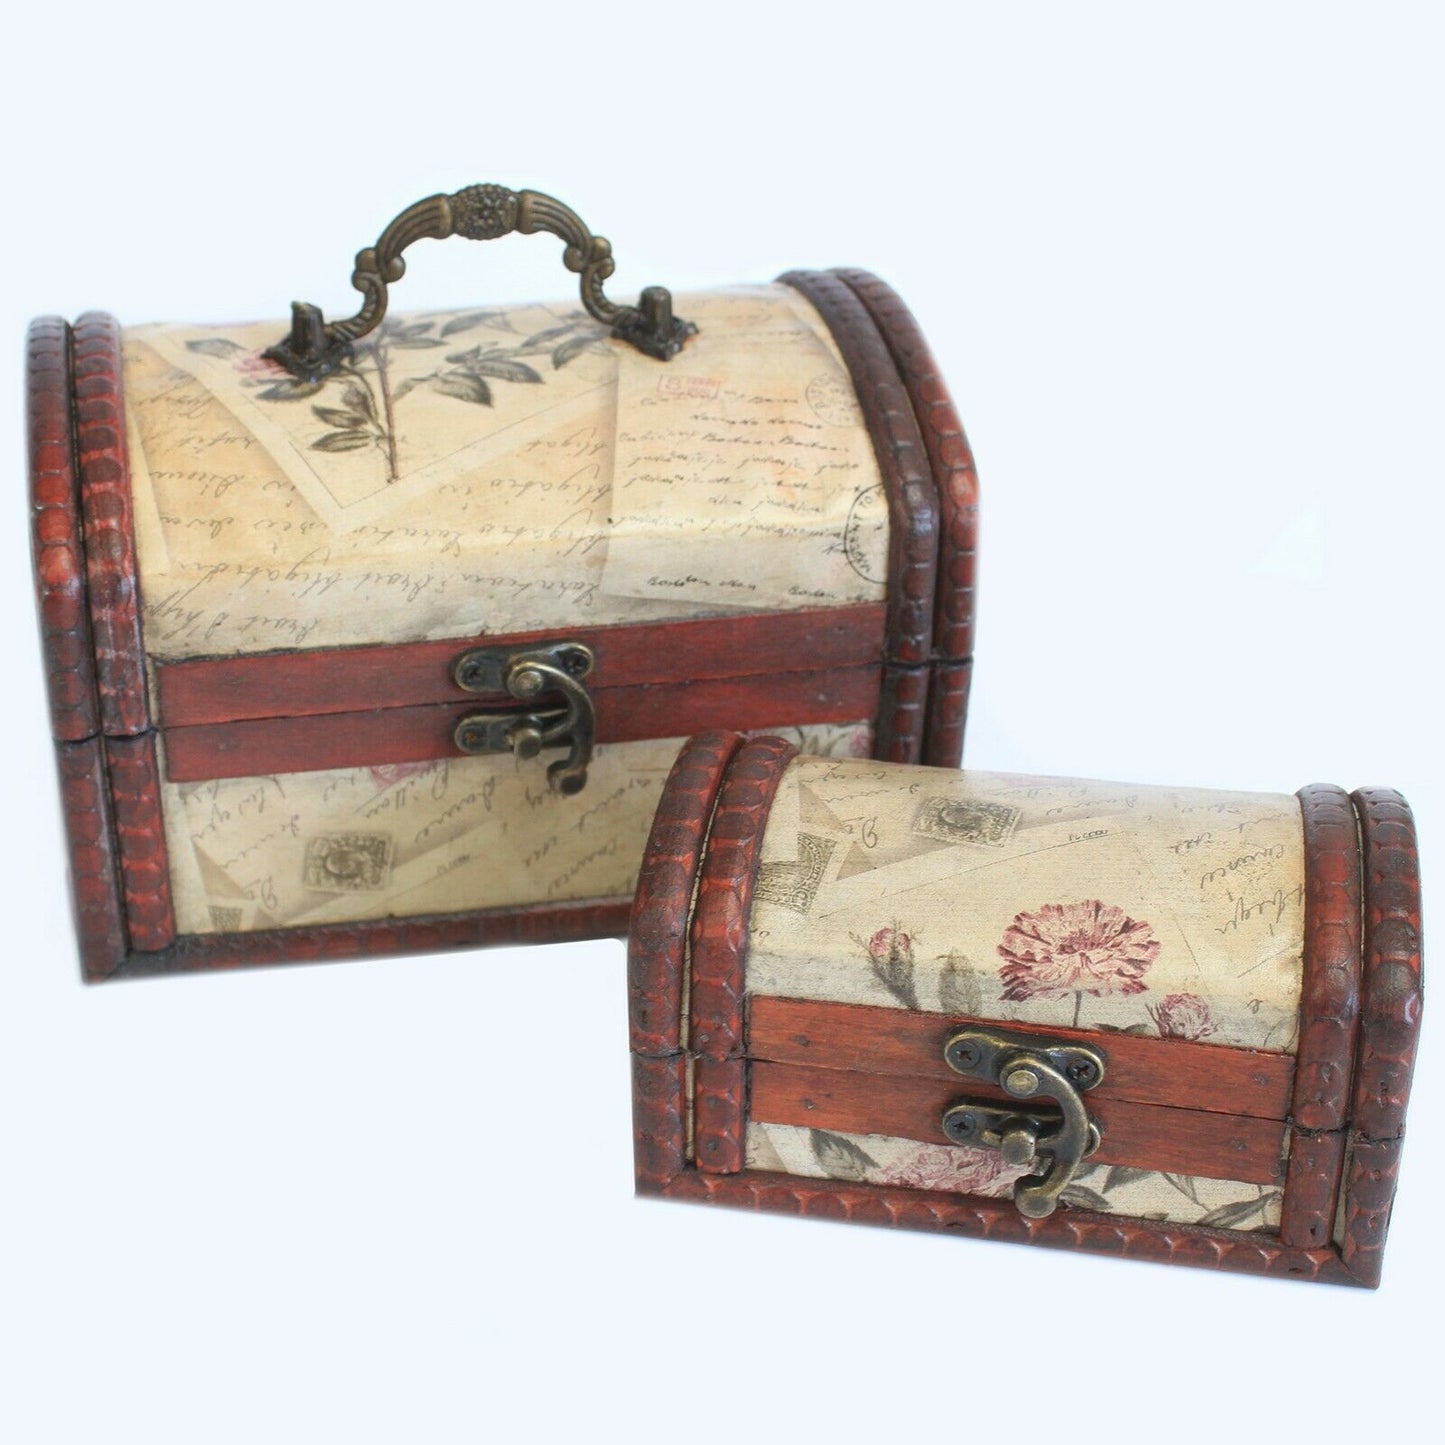 STEAMPUNK/VINTAGESets of 2 Colonial Boxes WOODEN HANDMADE Boxes -ROSE DESIGN none